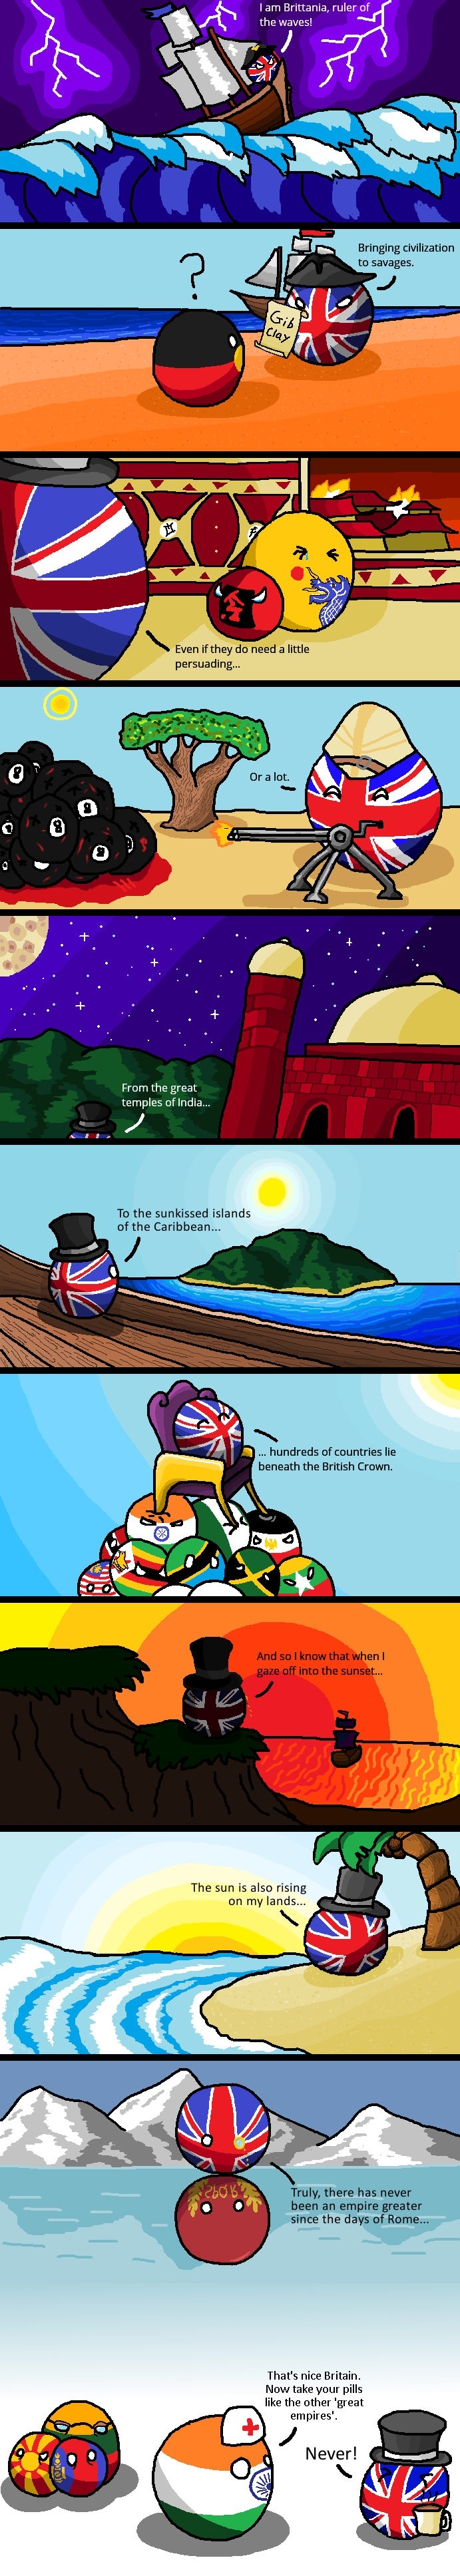 The glory of Brittania